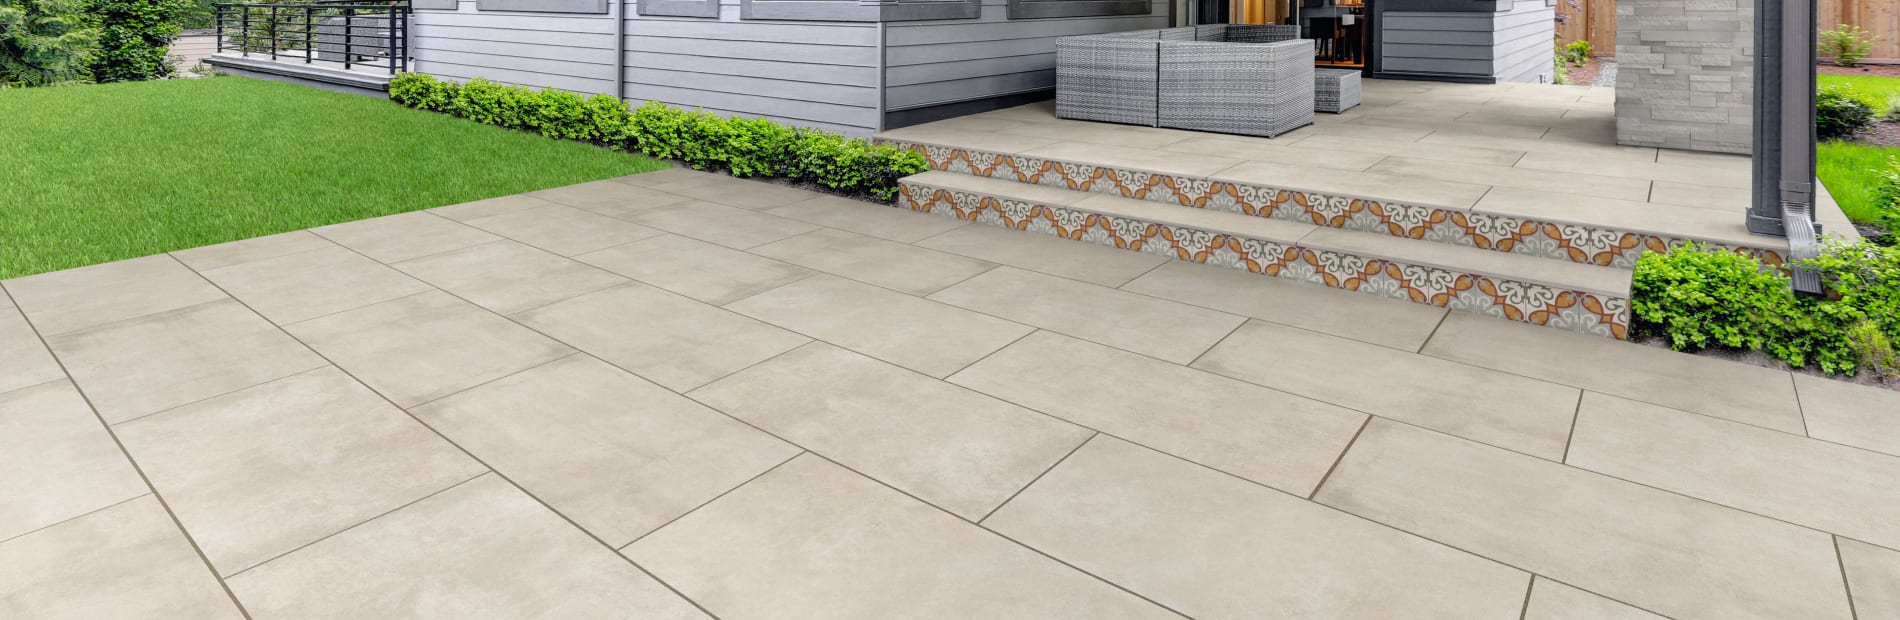 The benefits of porcelain paving for your garden | Marshalls